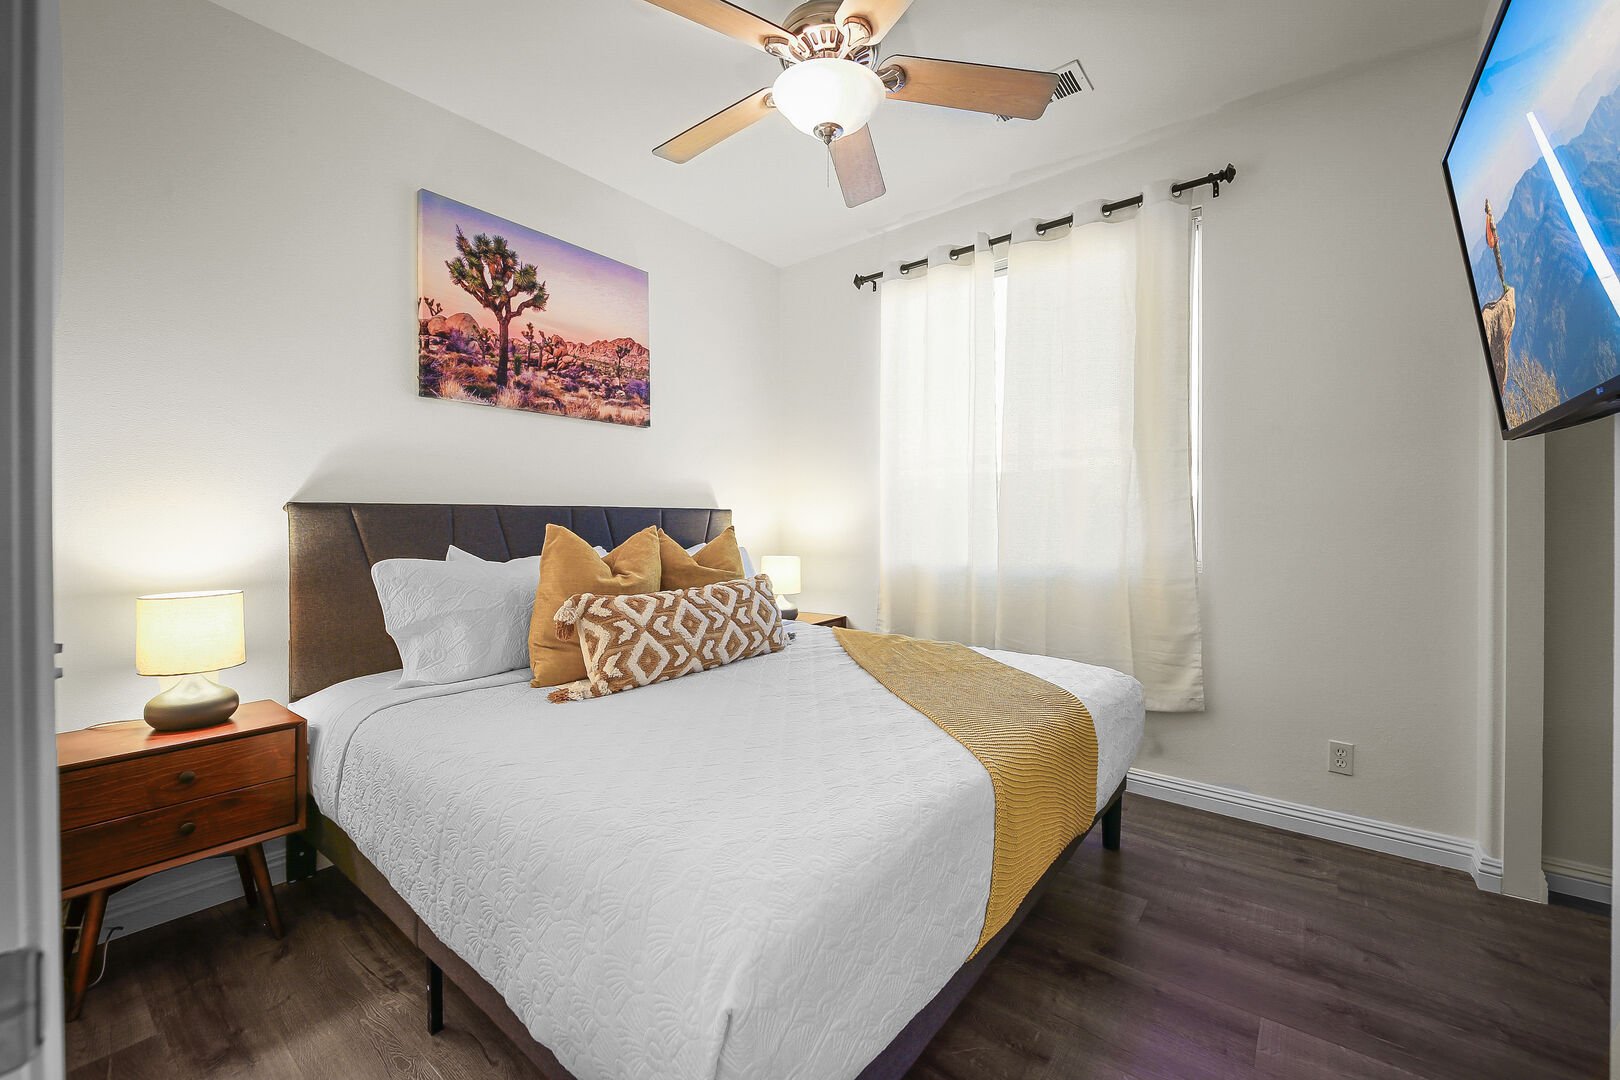 Bedroom 2 features a King-sized Bed, 44-inch LG Smart television, switch-controlled ceiling fan, and reach-in closet.